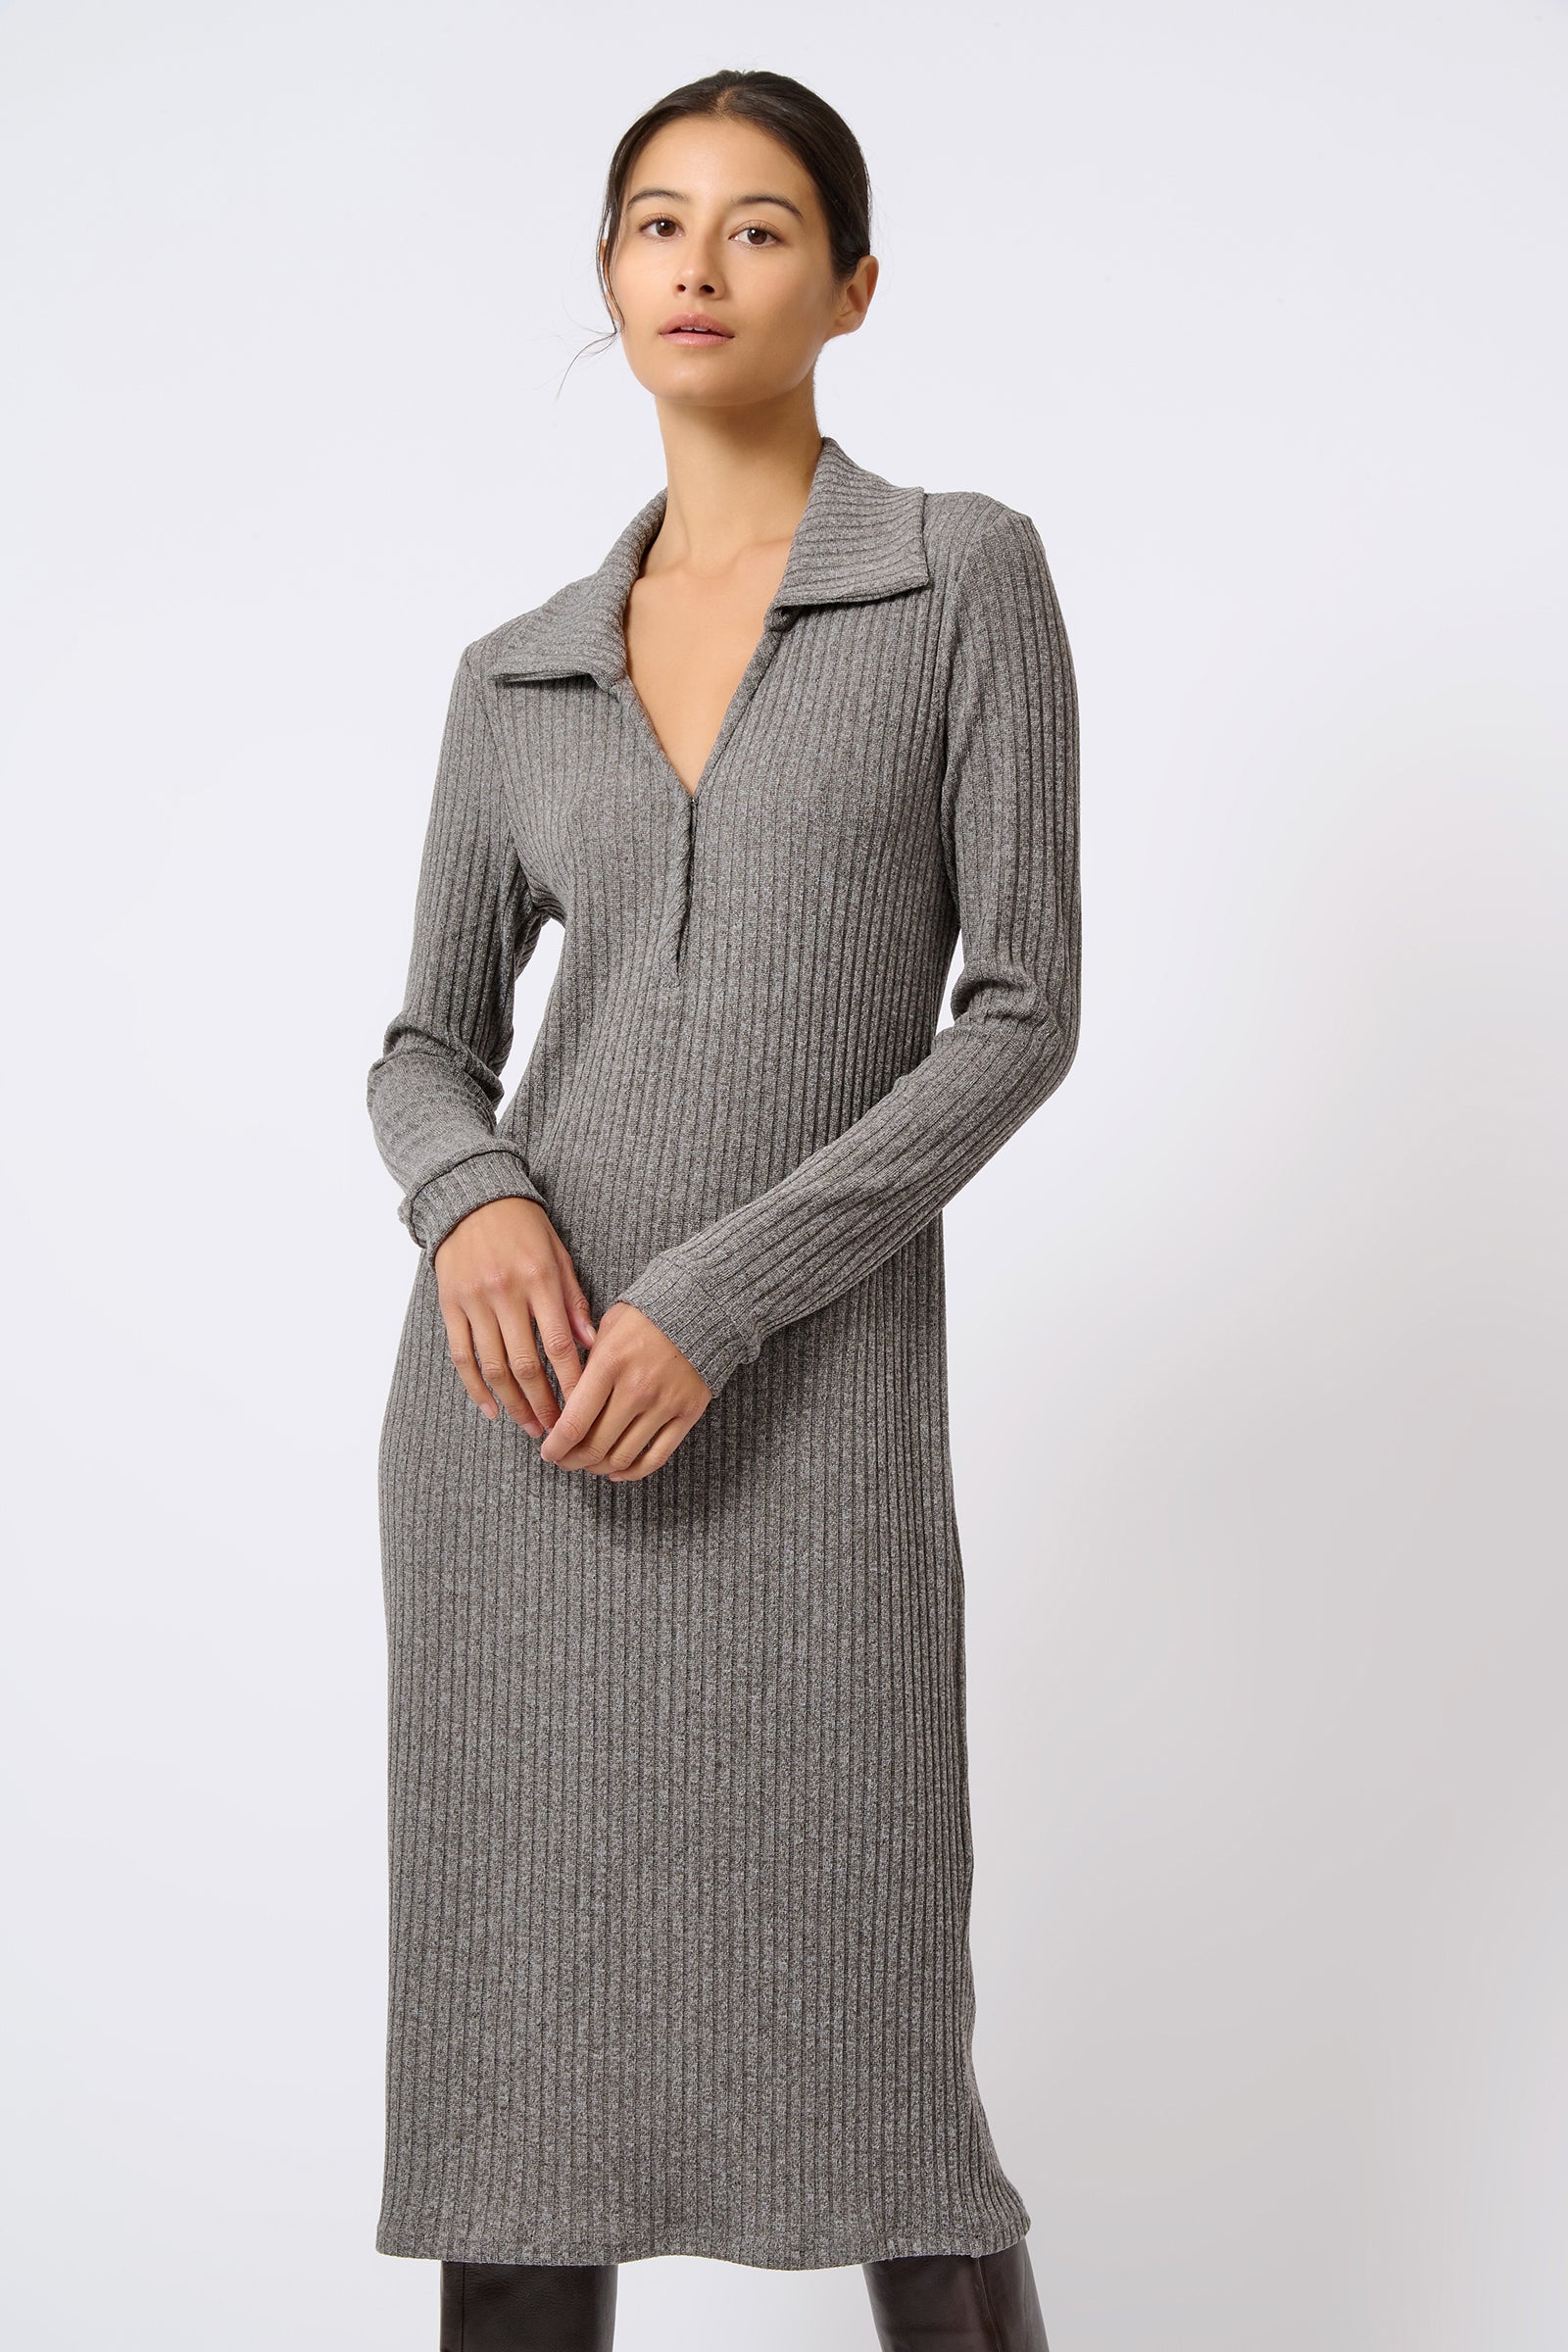 Kal Rieman Audrey Collared Rib Dress in Charcoal on Model with Hands in Front Full Front View